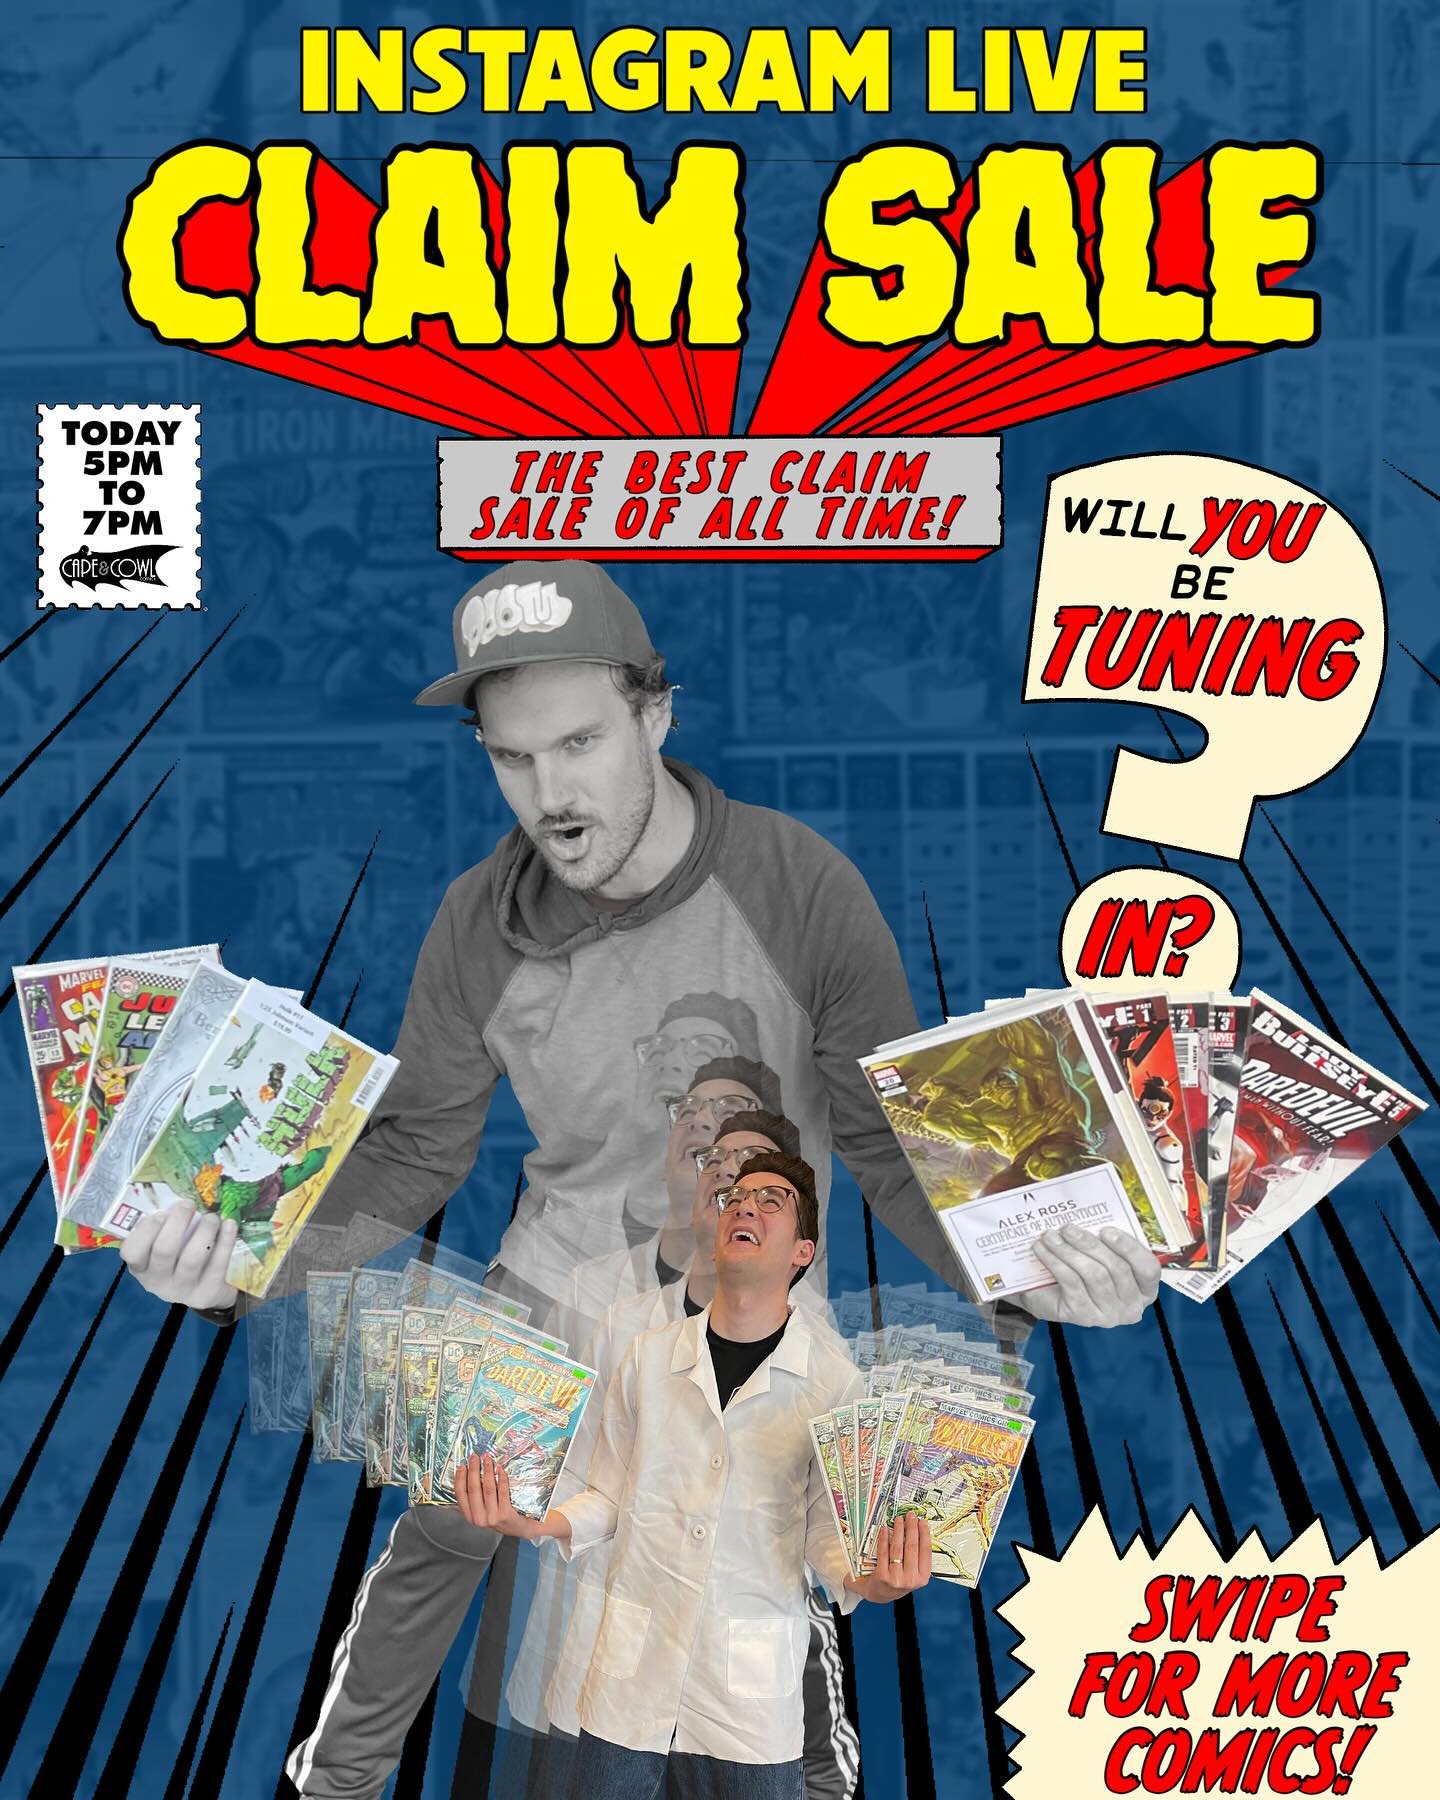 INSTAGRAM LIVE CLAIM SALE! Tune in at 5pm when our BANNER says &ldquo;live&rdquo; for INCREDIBLE deals on some SMASHING books! Swipe for a peek at just some of the comics we&rsquo;ll be bringing!